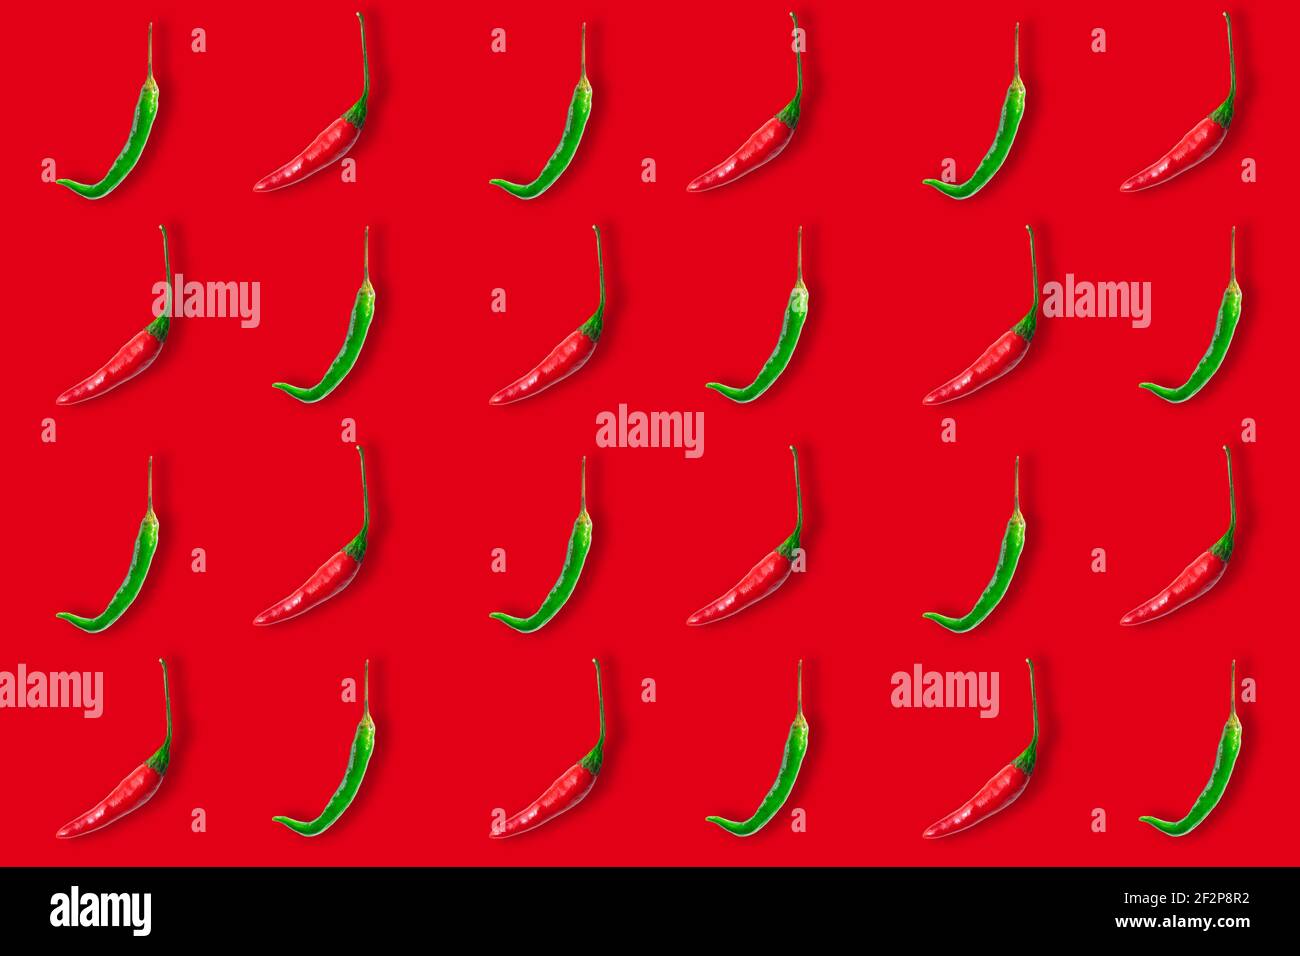 Seamless pattern of red and green hot chili peppers isolated on red background. Top view. Flat lay Stock Photo